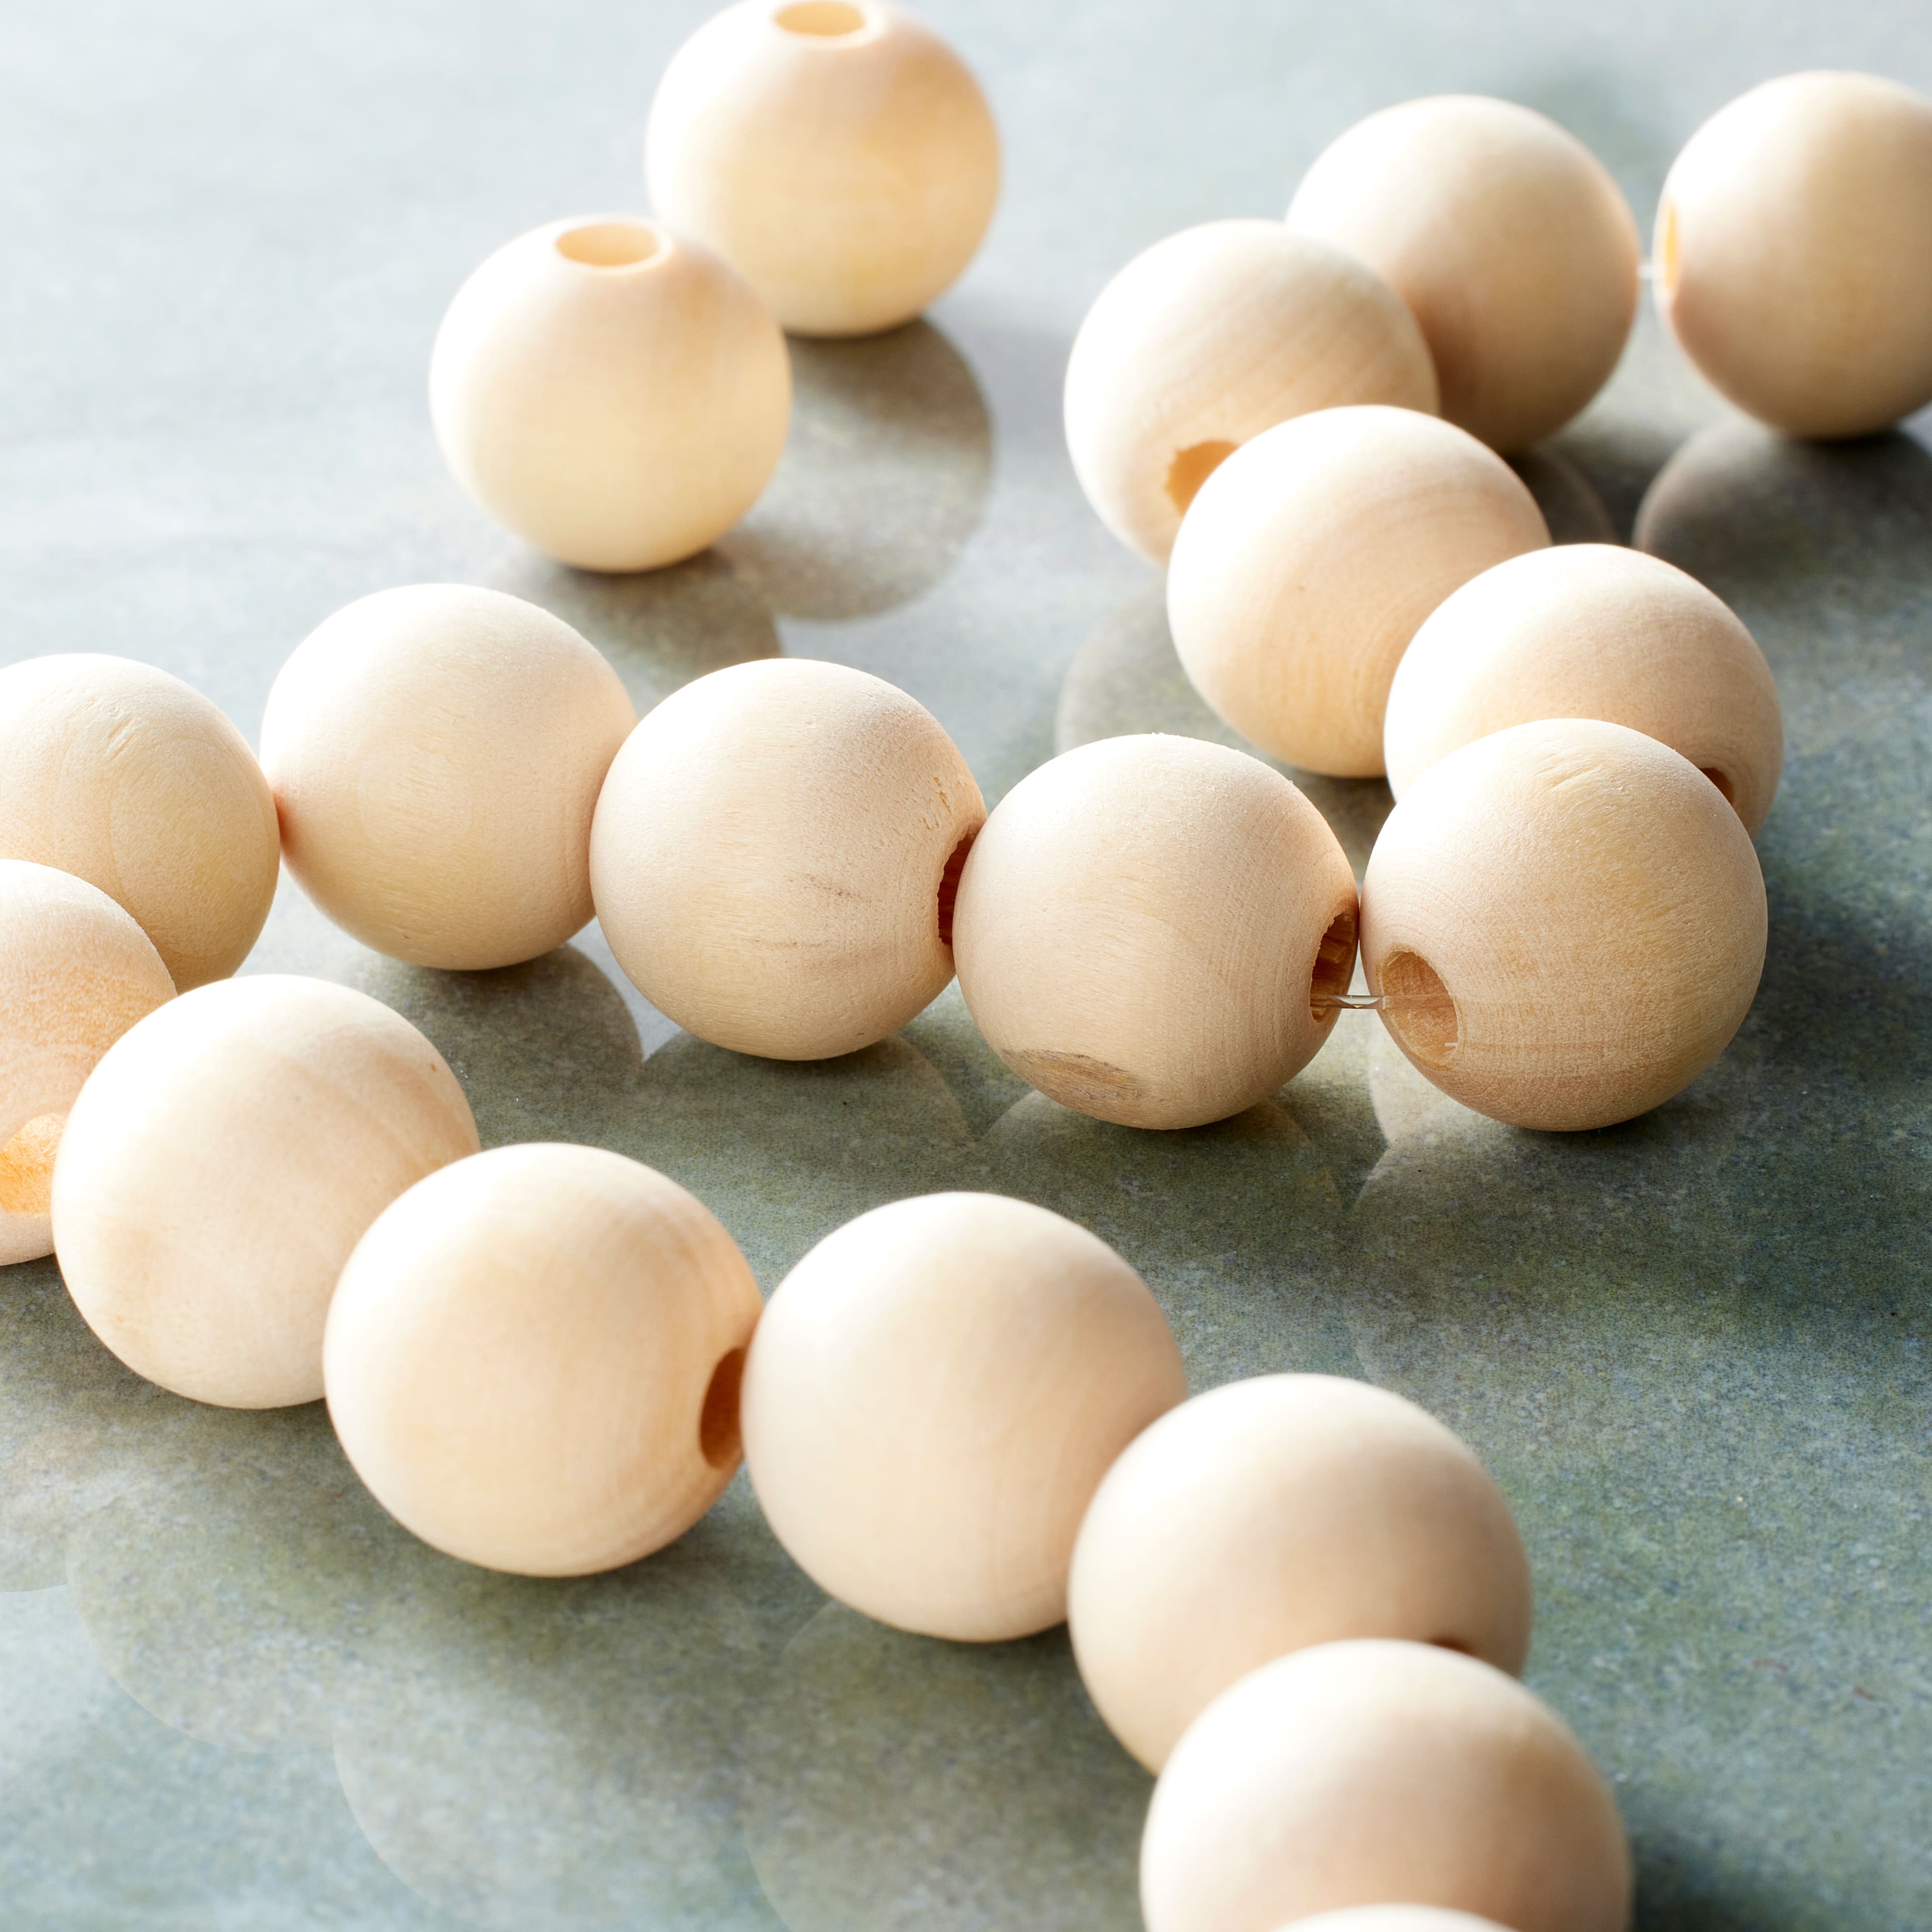 Natural Wooden Round Beads, 15mm by Bead Landing&#x2122;